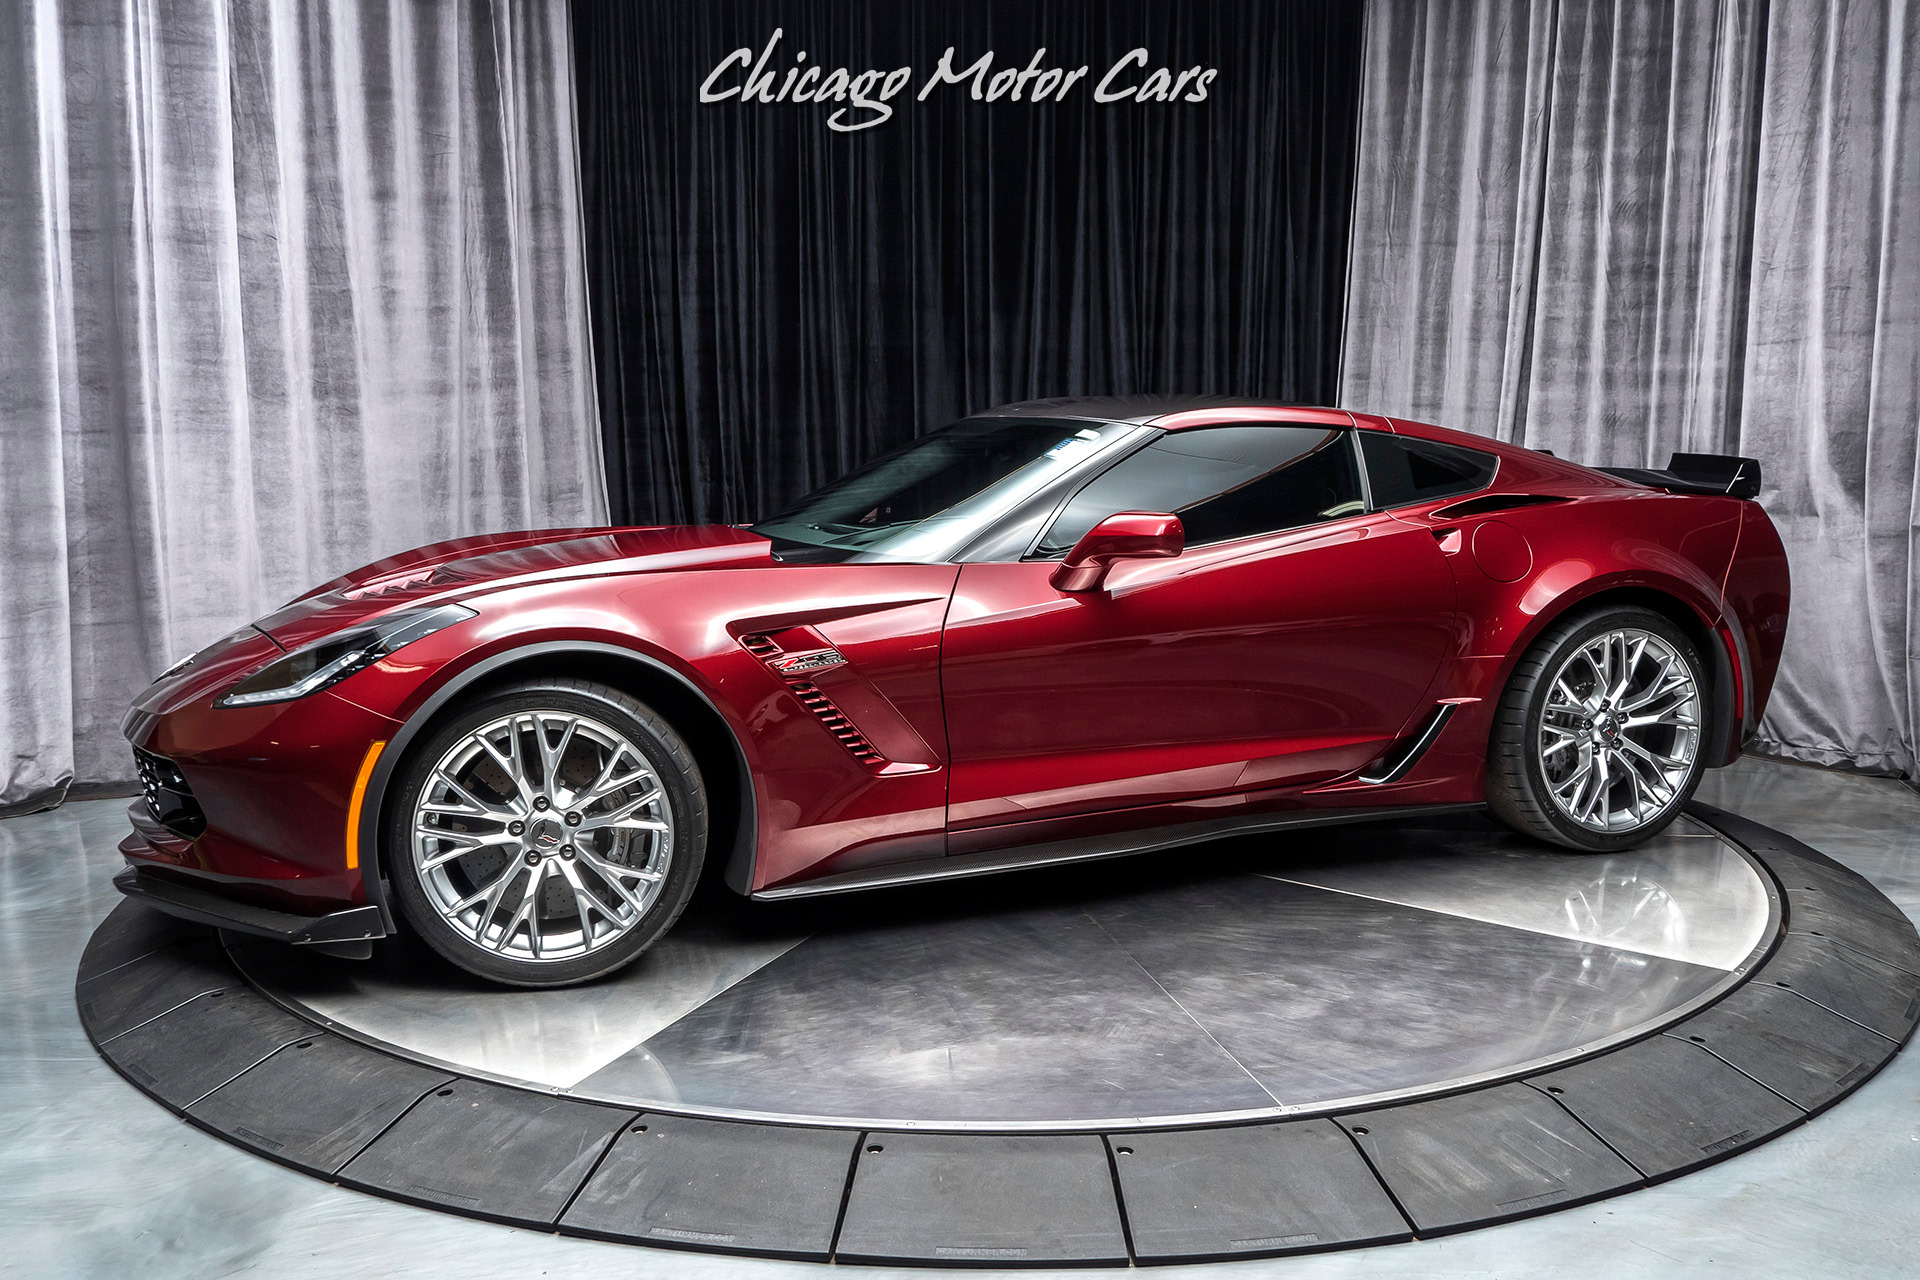 Used-2016-Chevrolet-Corvette-Z06-3LZ-Z07-Coupe-MSRP-112K-LOADED-Extremely-Well-Equipped